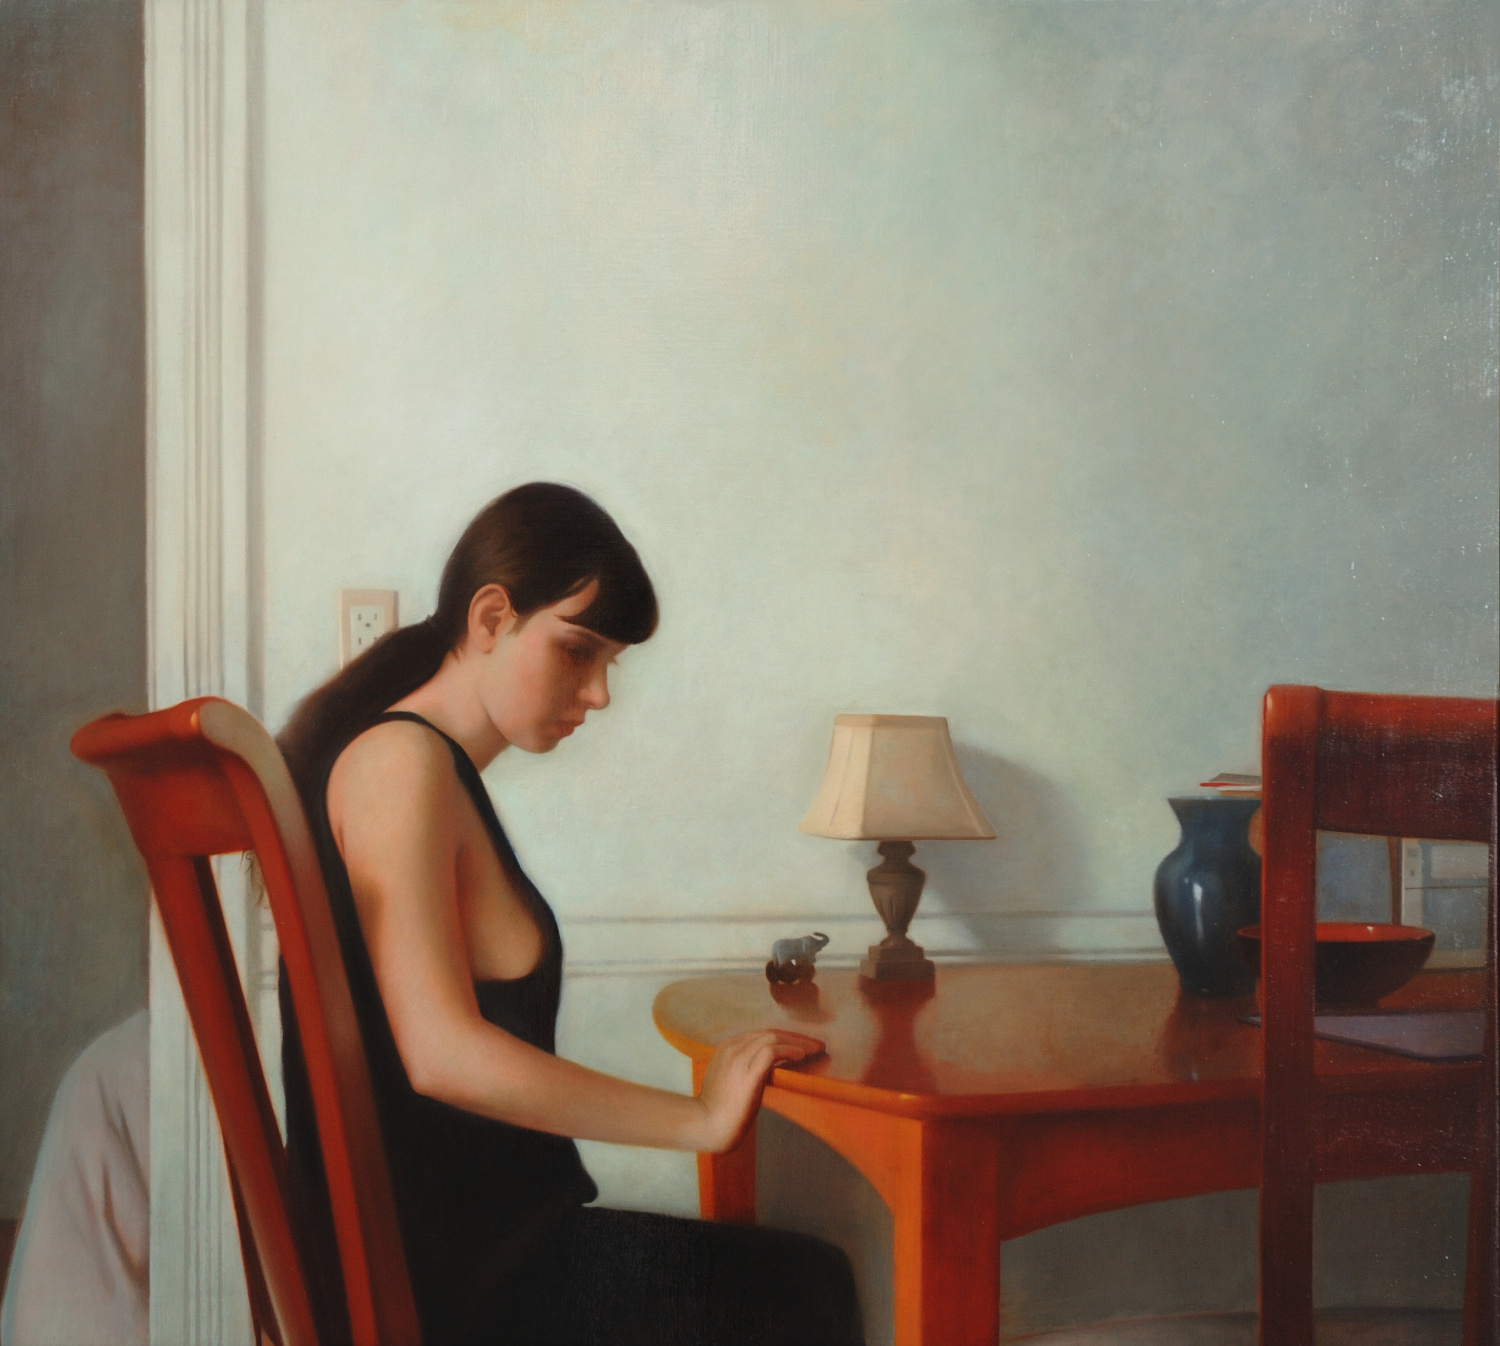   Transposition , 2007, Oil on linen, 34 x 38 inches, Private collection 